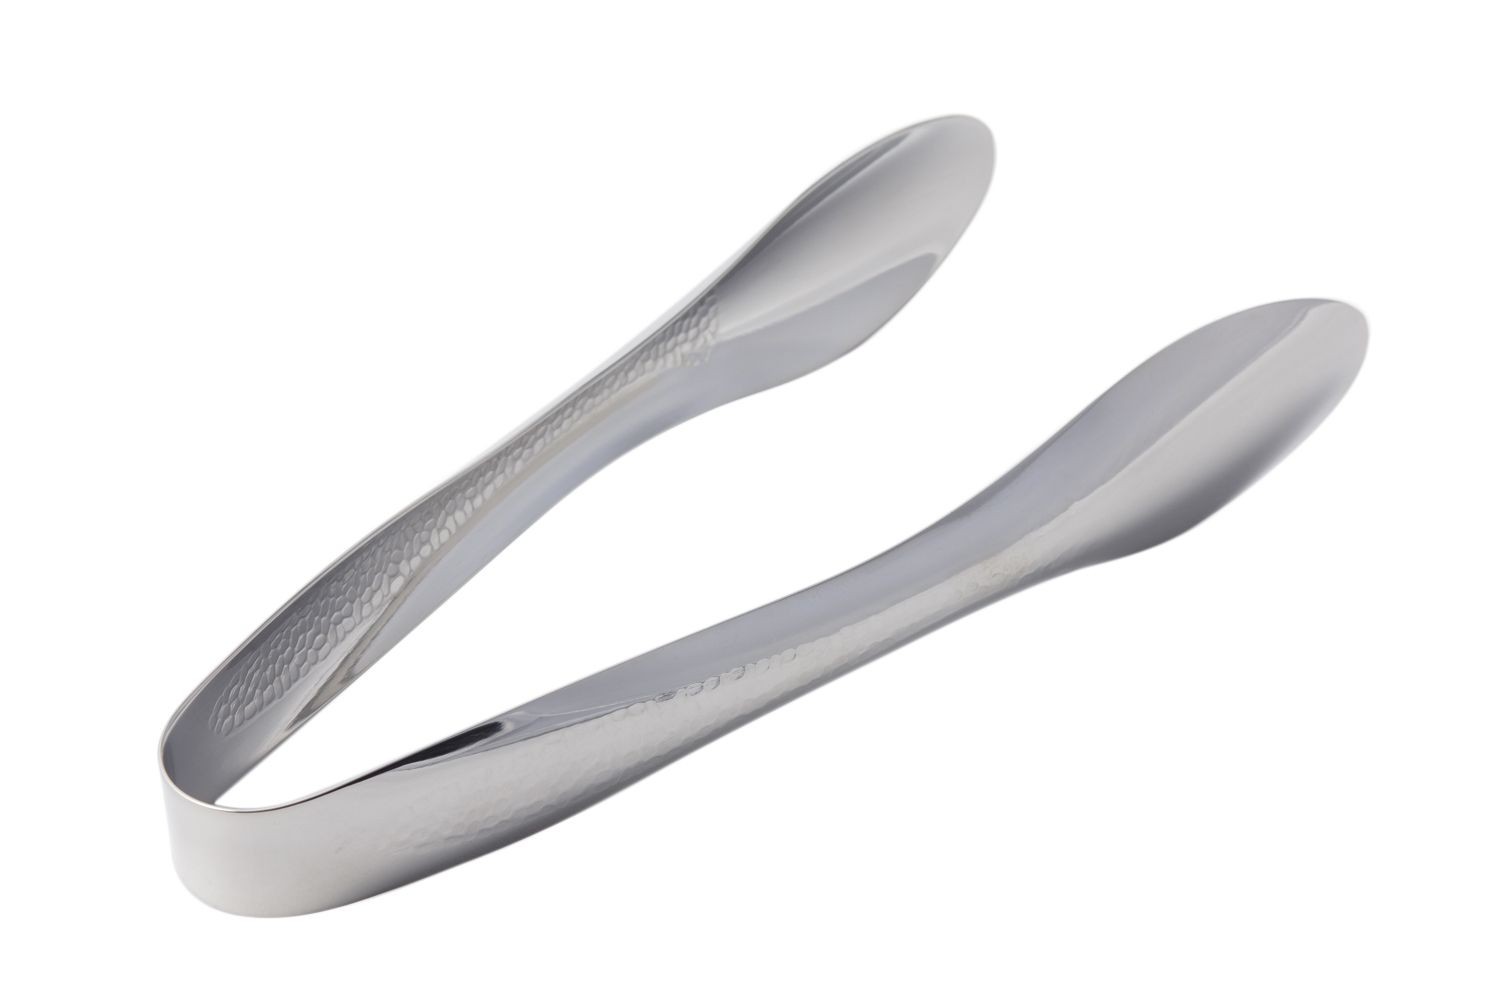 Bon Chef 9461HF EZ Use Banquet Serving Tongs with Hammered Finish, 9 1/4"